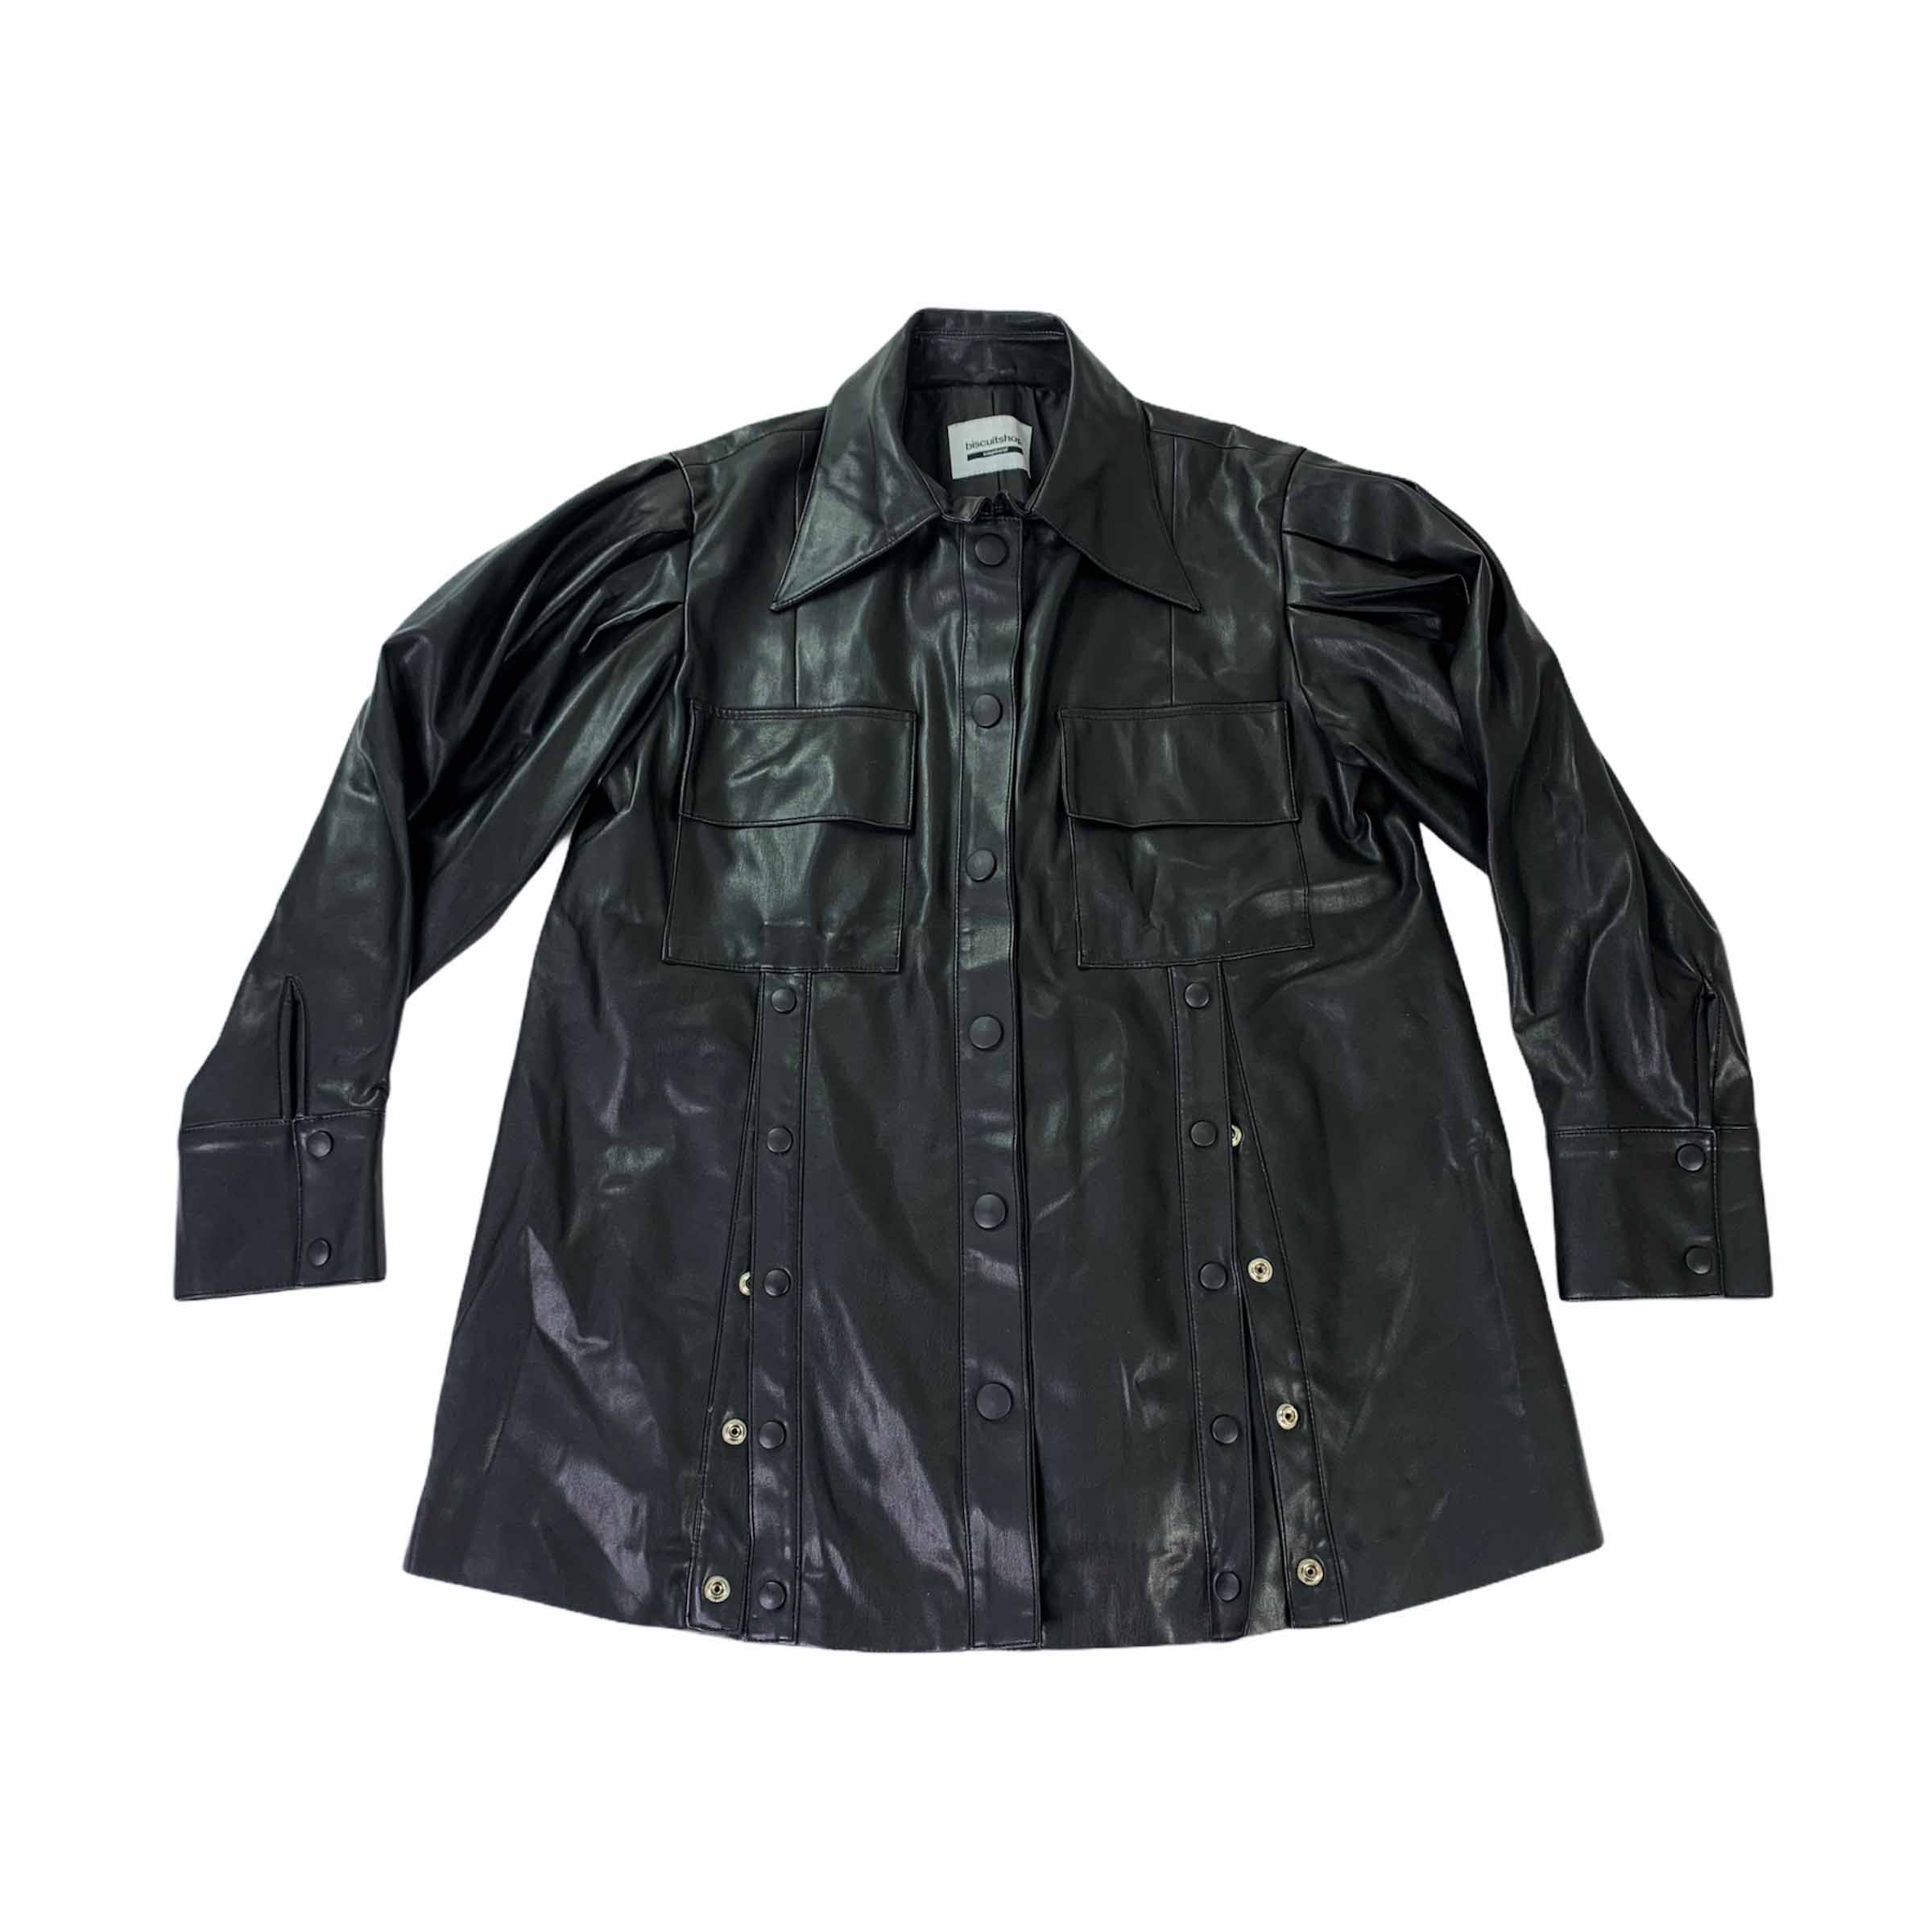 [Biscuitshop] Puff Sleeved Eco Leather Jacket BK - Size Free(55)